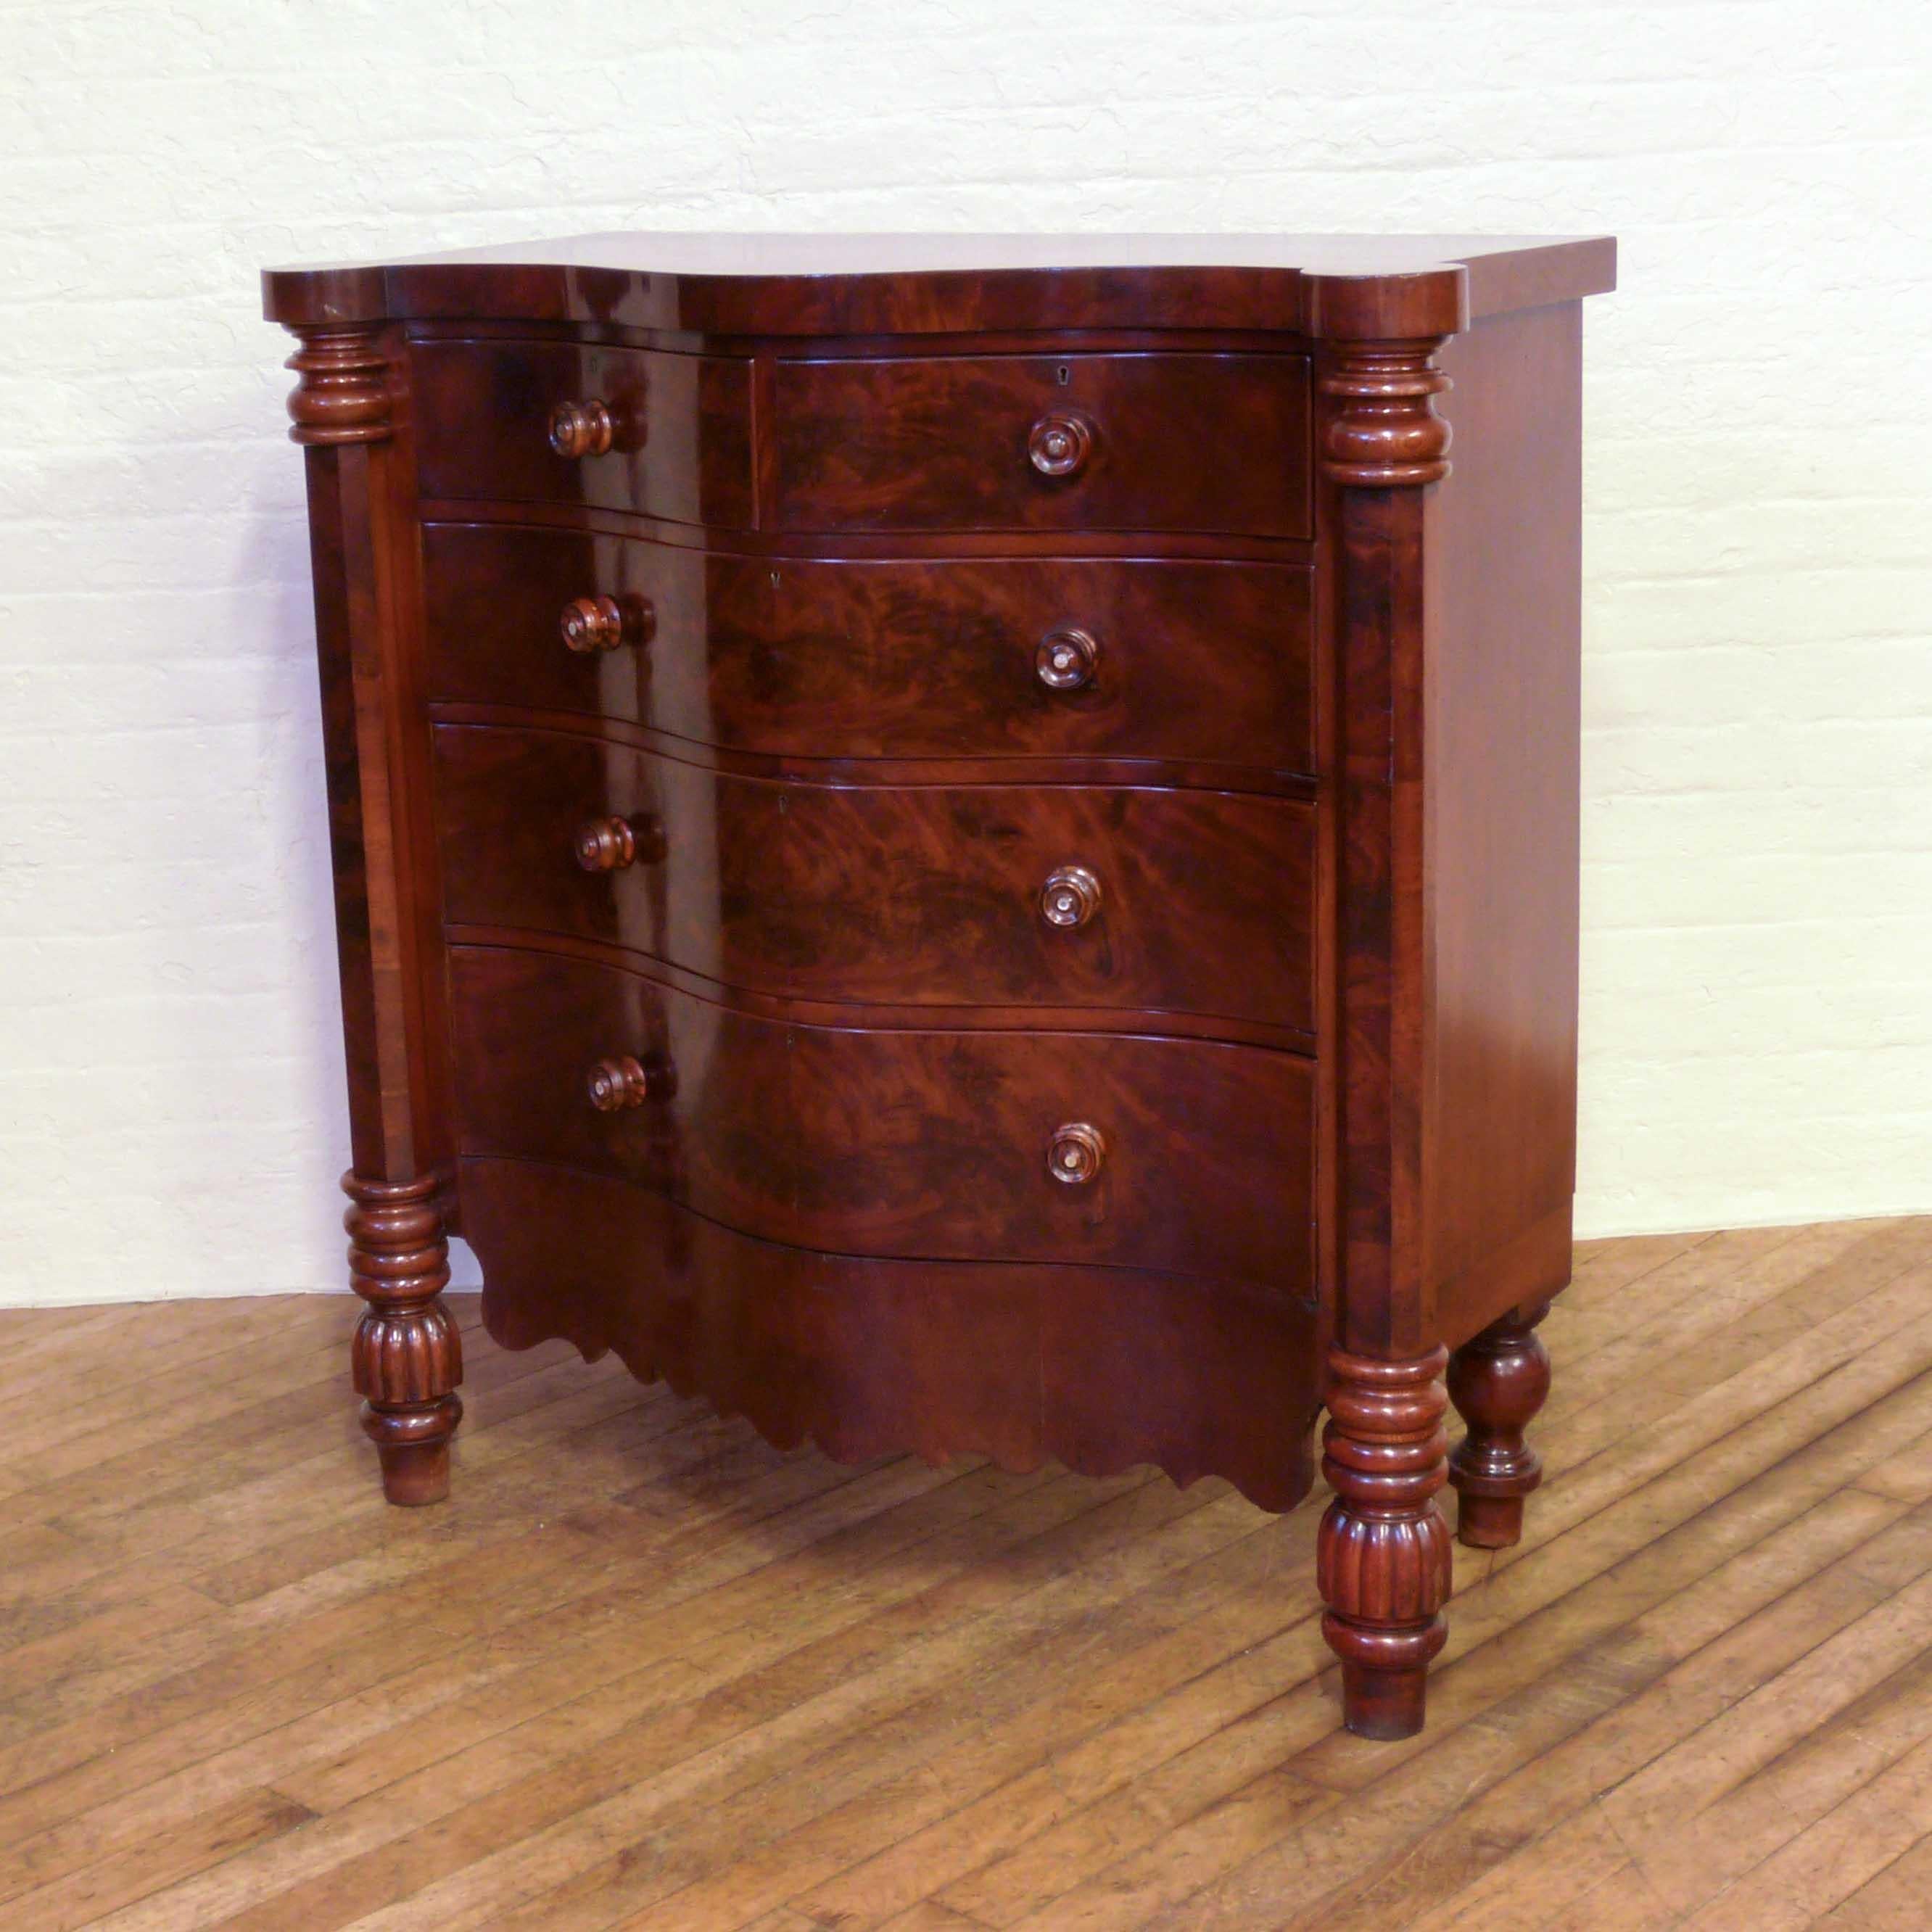 Lovely Victorian mahogany chest of drawers unusual to be serpentine fronted. Standing on large, tuned legs, the front with attractive fluting rising up to corner octagonal pilasters with turned capitals. The base apron is nicely fretted above which